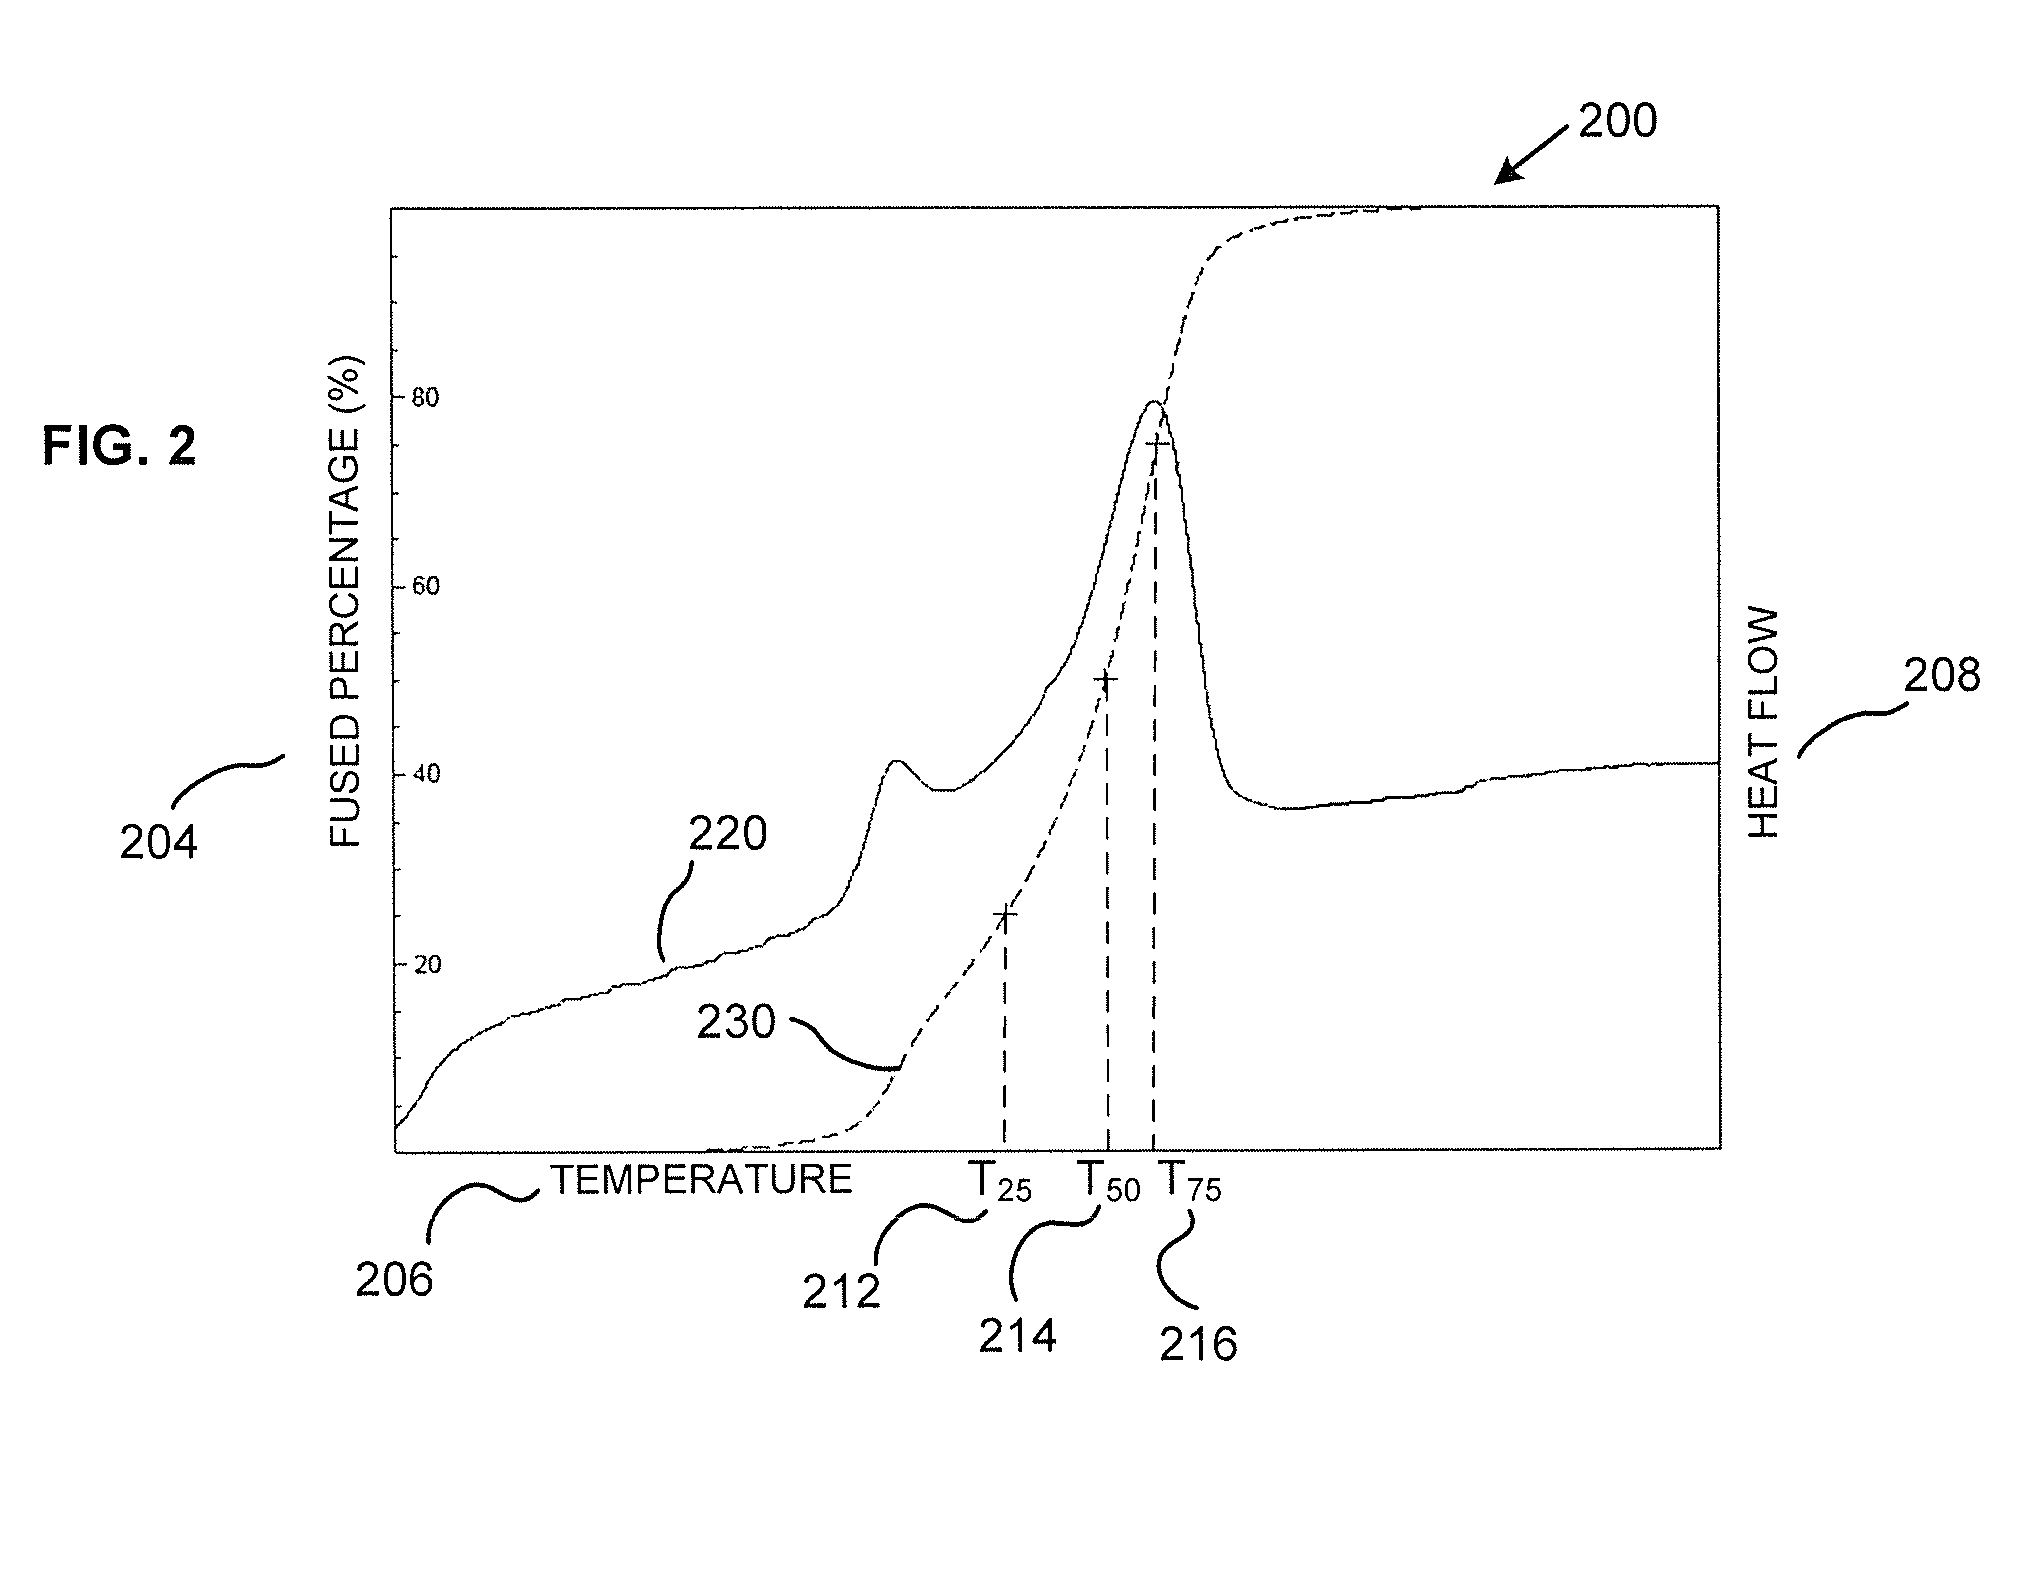 Method For Analytically Determining SLS Bed Temperatures